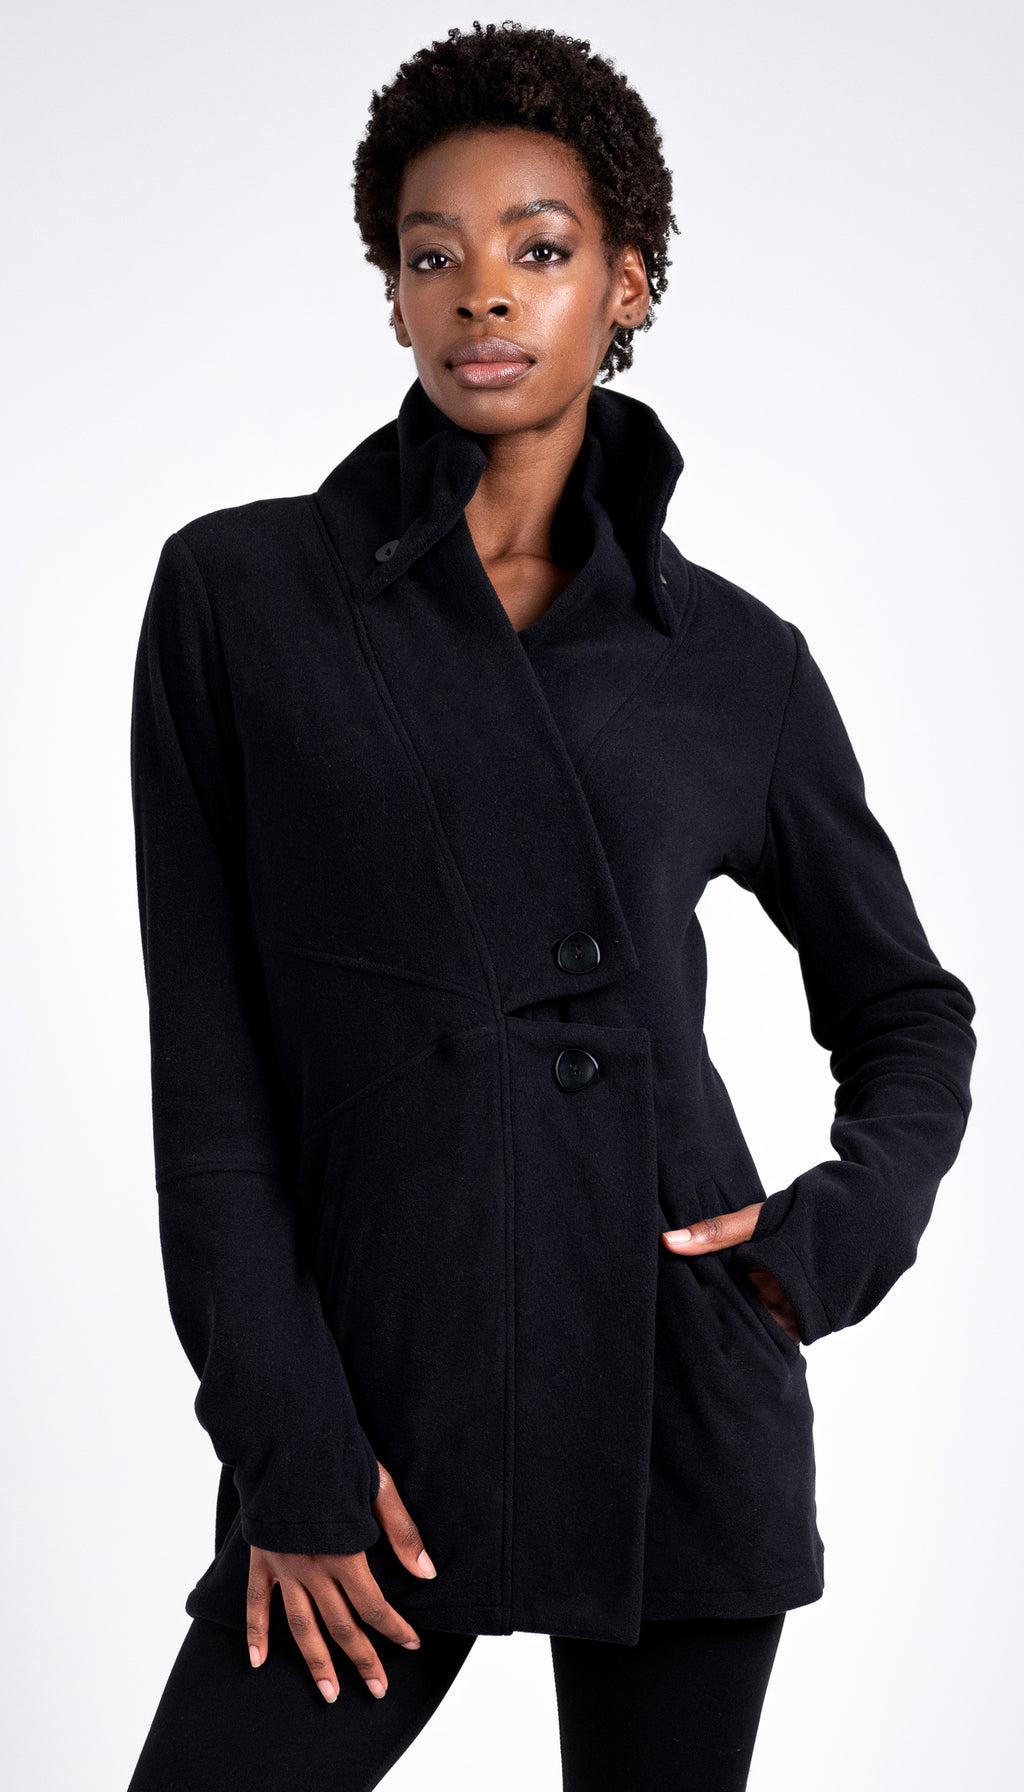 Double Collar Microfleece Sweater Jacket / Black *Relaxed Fit